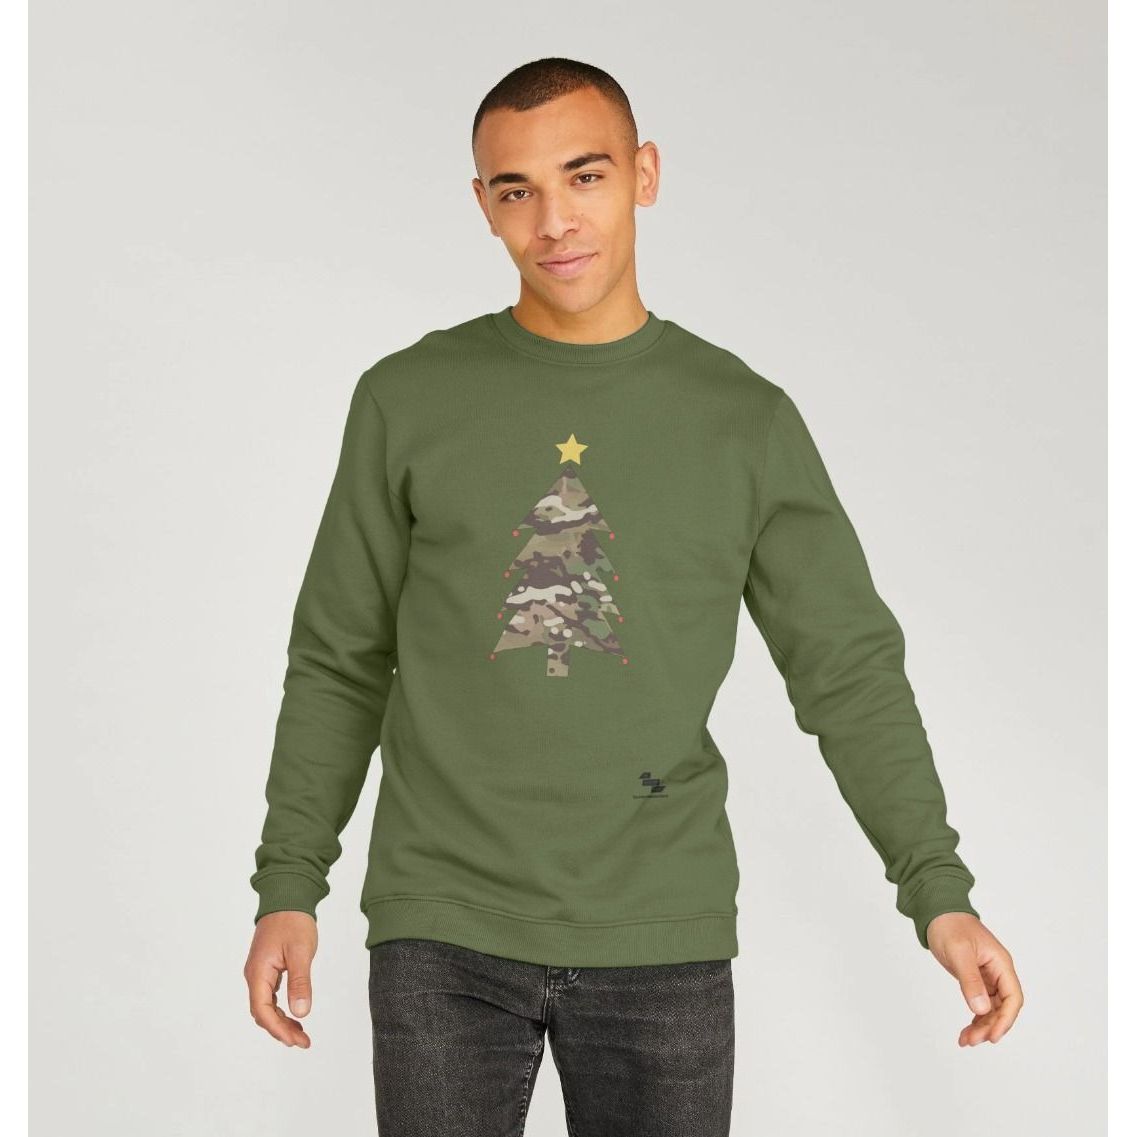 Unisex camouflage Christmas jumper - ABF The Soldiers' Charity Shop